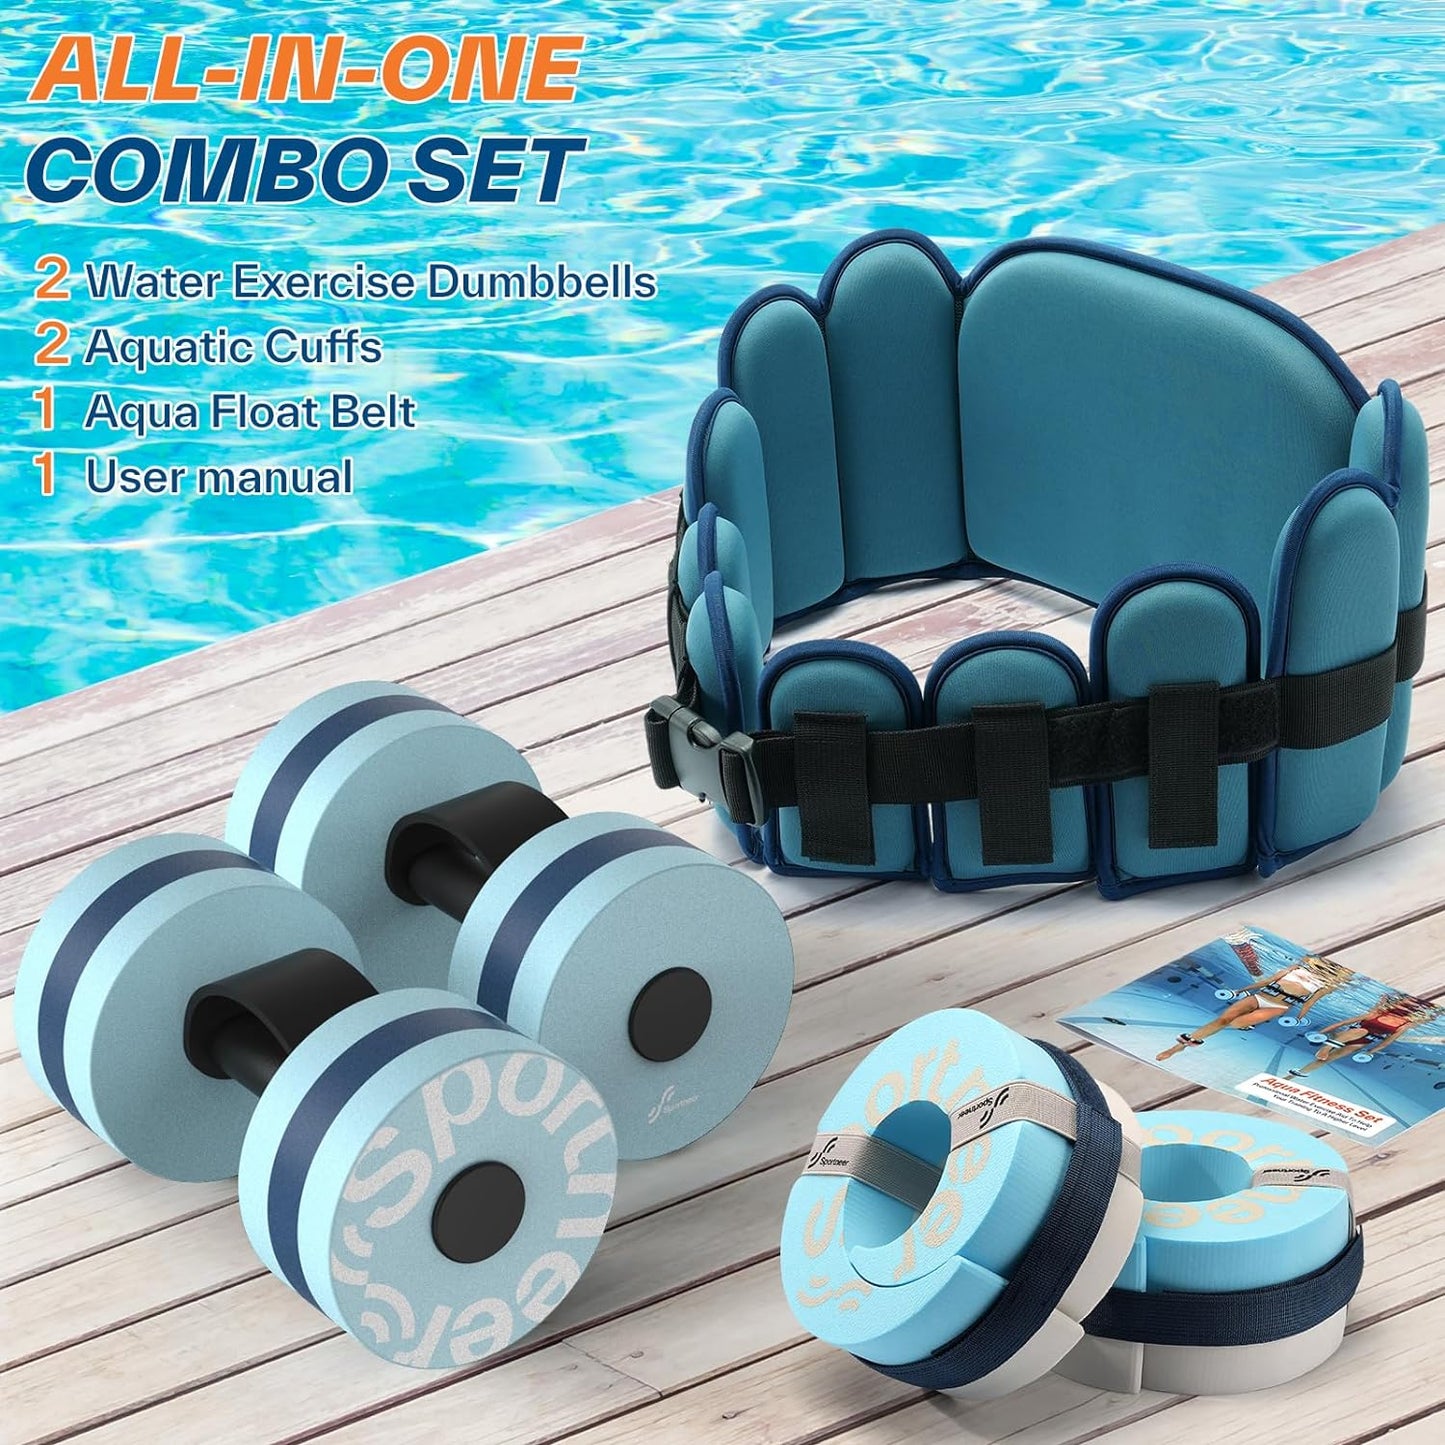 Water Aerobics Pool Exercise Equipment:  Water Workout Combo Set Includes High Density Water Dumbbell Aqua Belt Water Ankle Weights for Aquatic Therapy Pool Fitness Water Exercise